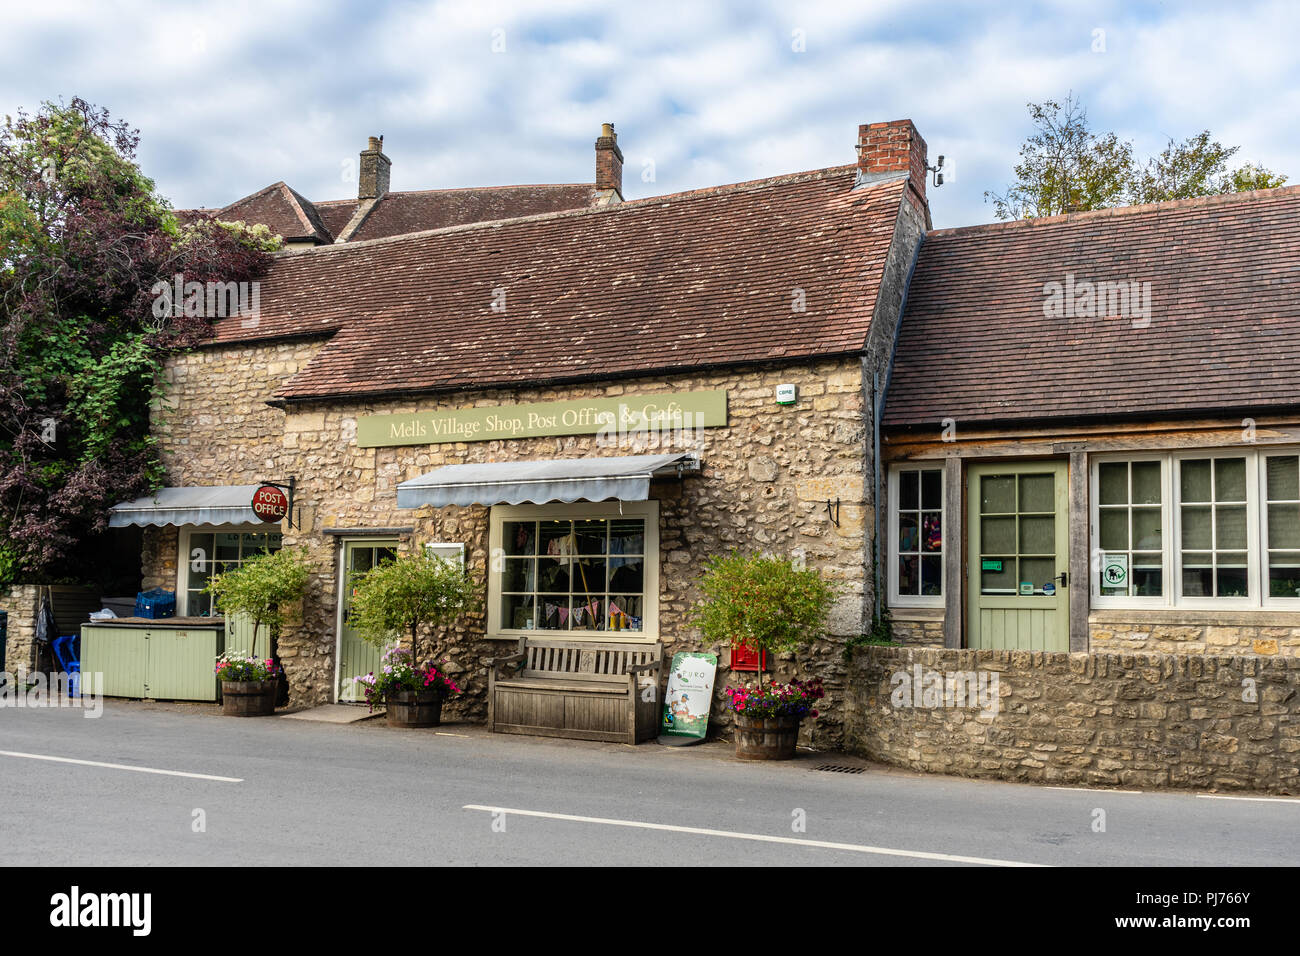 Village shop and rural Post Office in the quaint village of Mells in East Somerset, England, UK Stock Photo